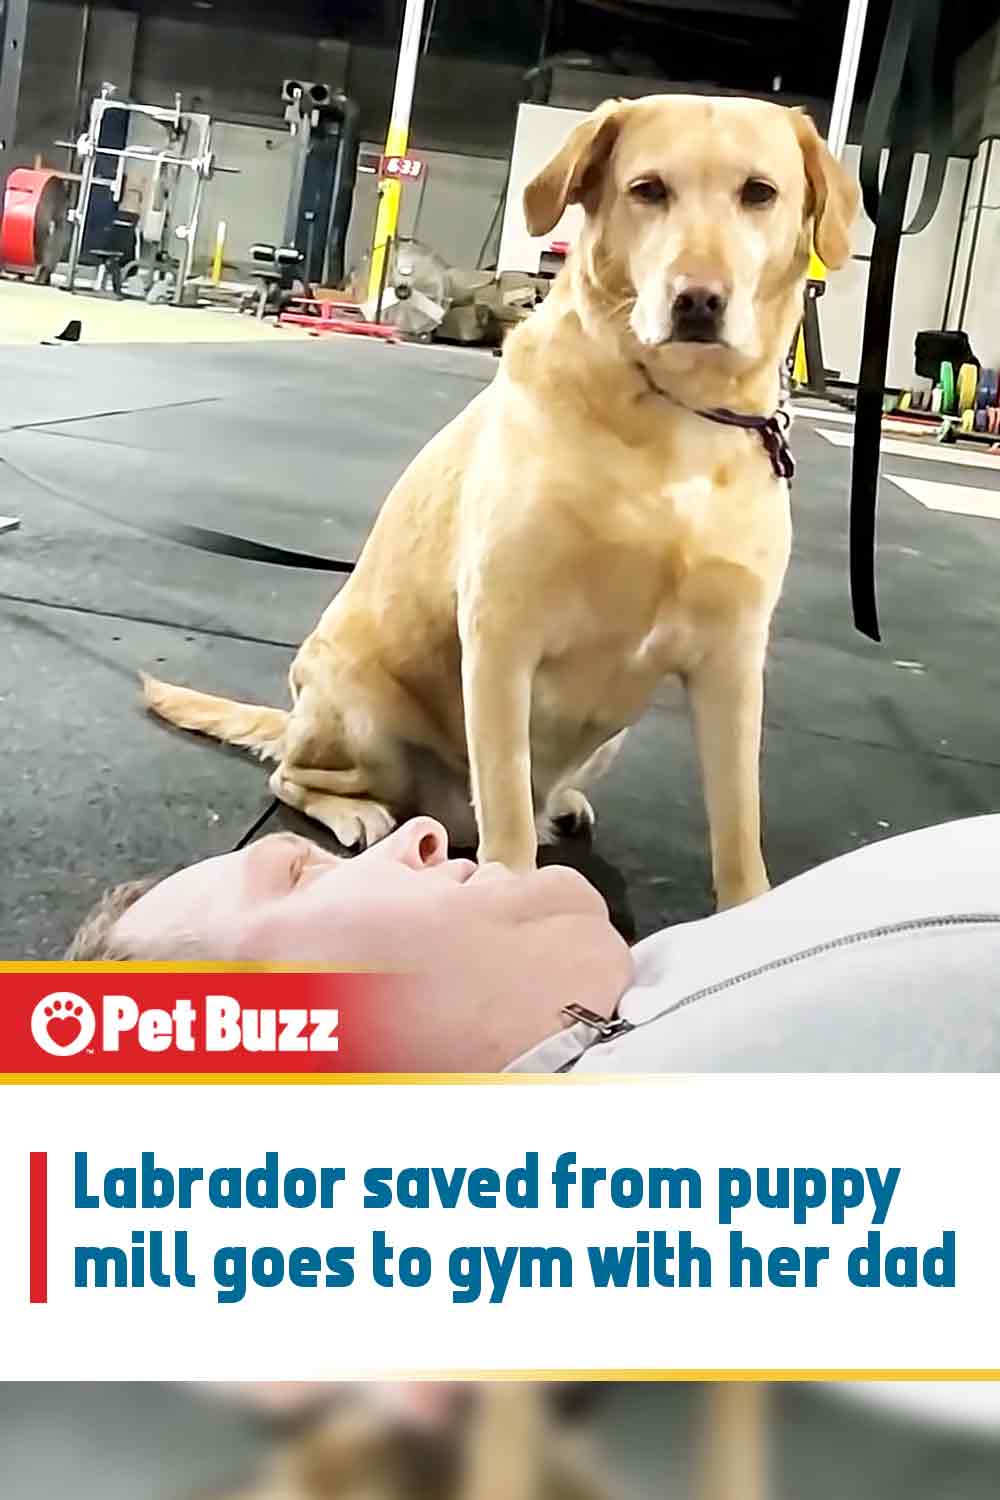 Labrador saved from puppy mill goes to gym with her dad